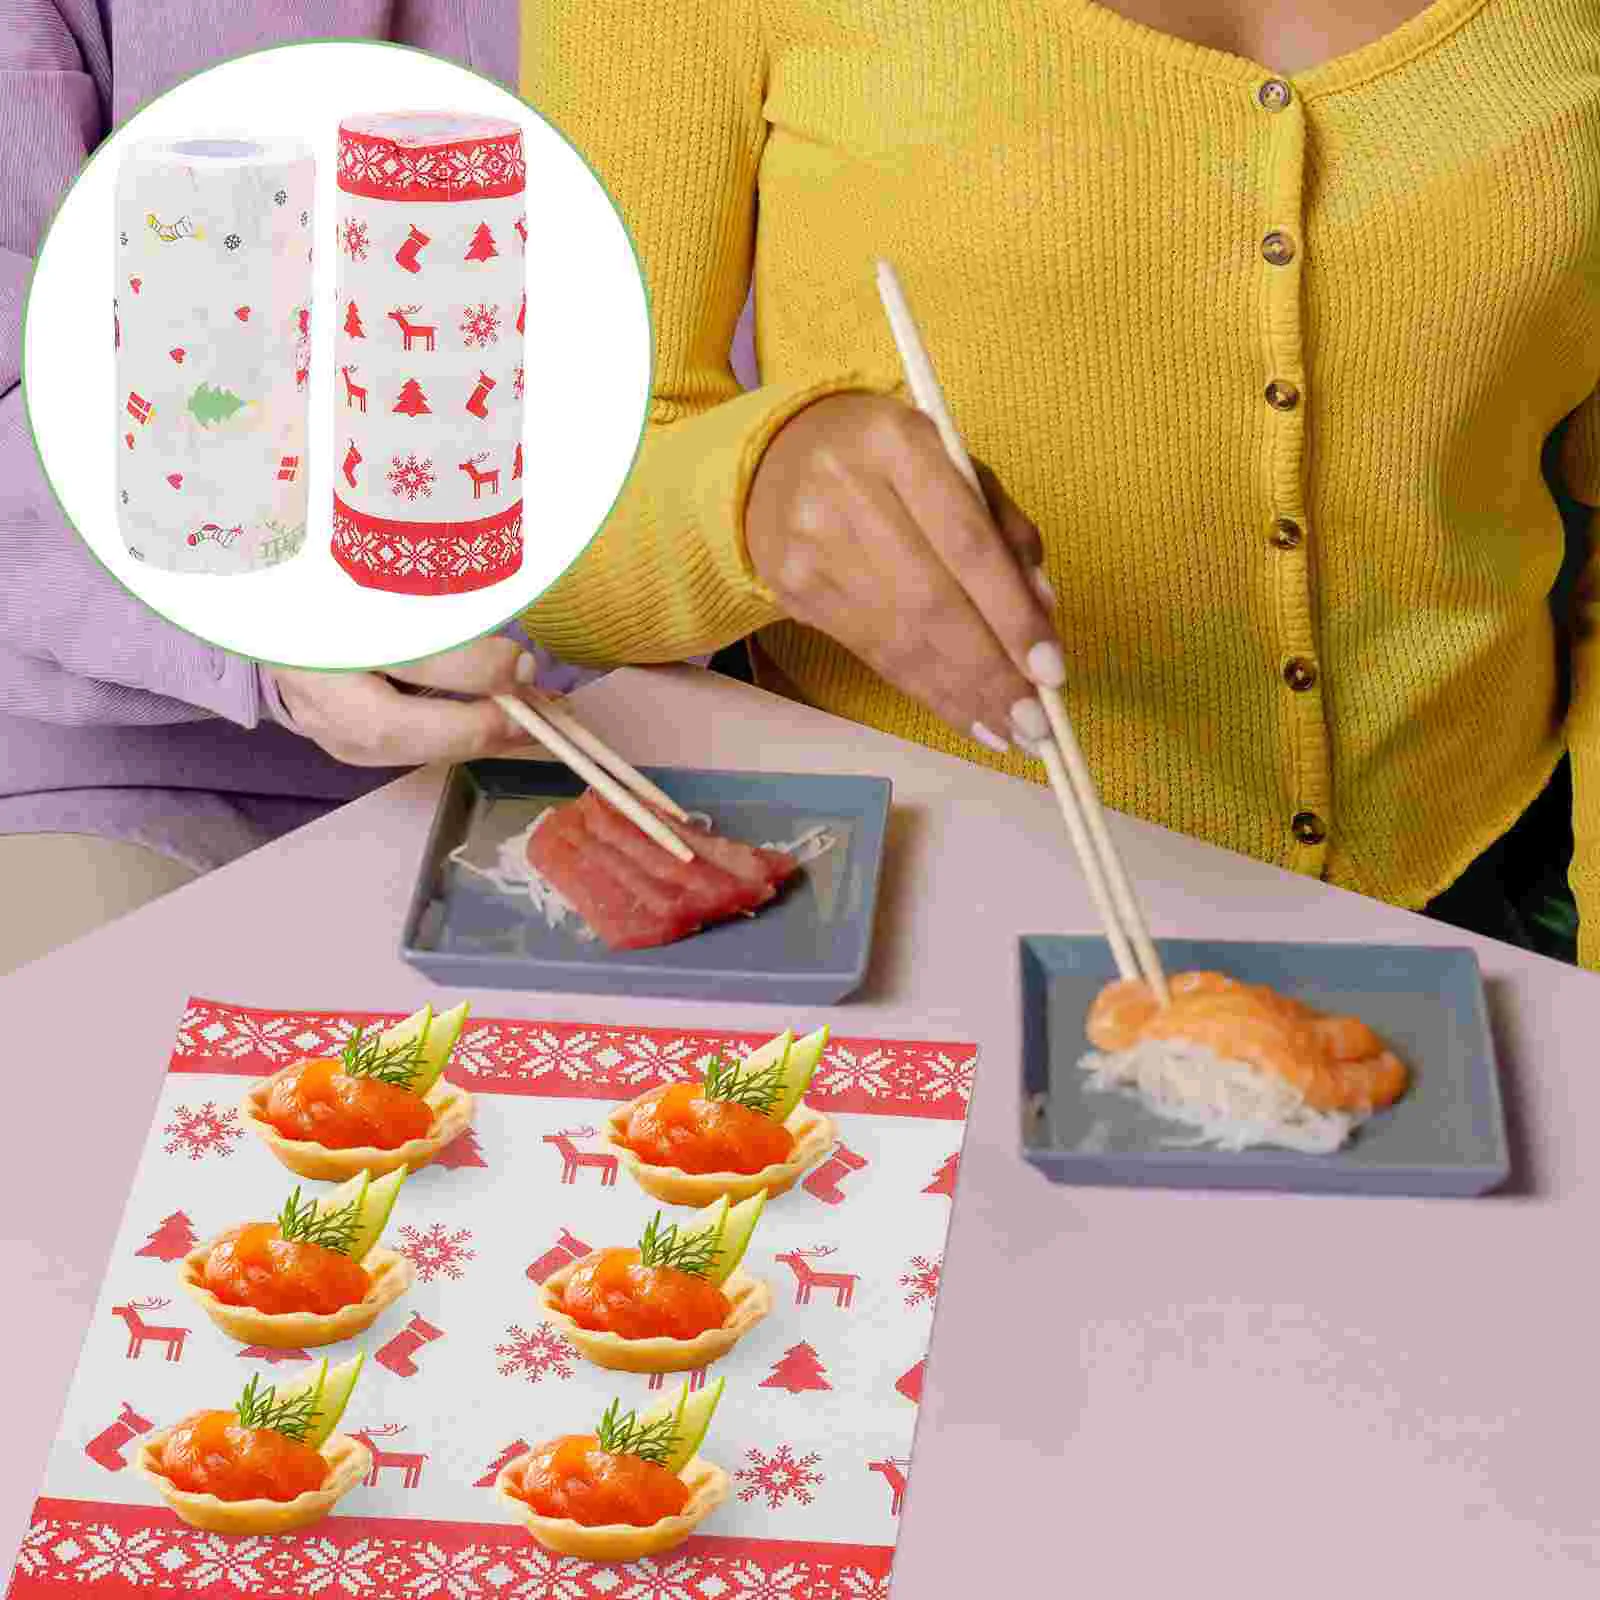 

Christmas Decorations Grease-Proof Paper Fried Food Paper Christmas Themed Snacks Dish Towel Food Paper Kitchen Supplies